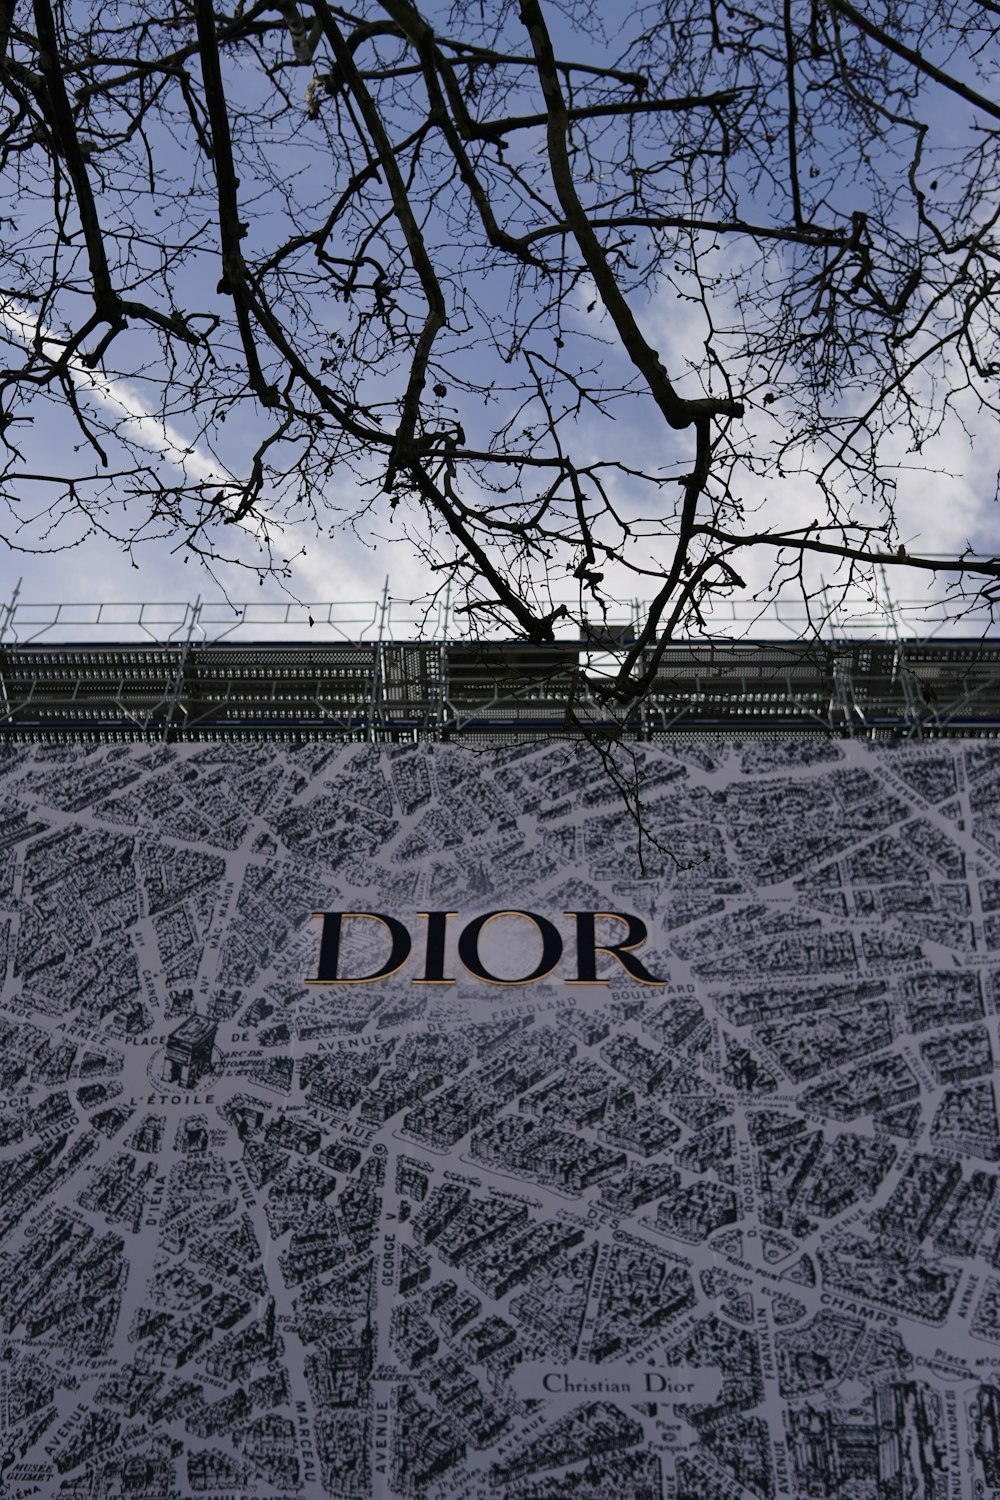 a map of the city of dior with trees in the foreground